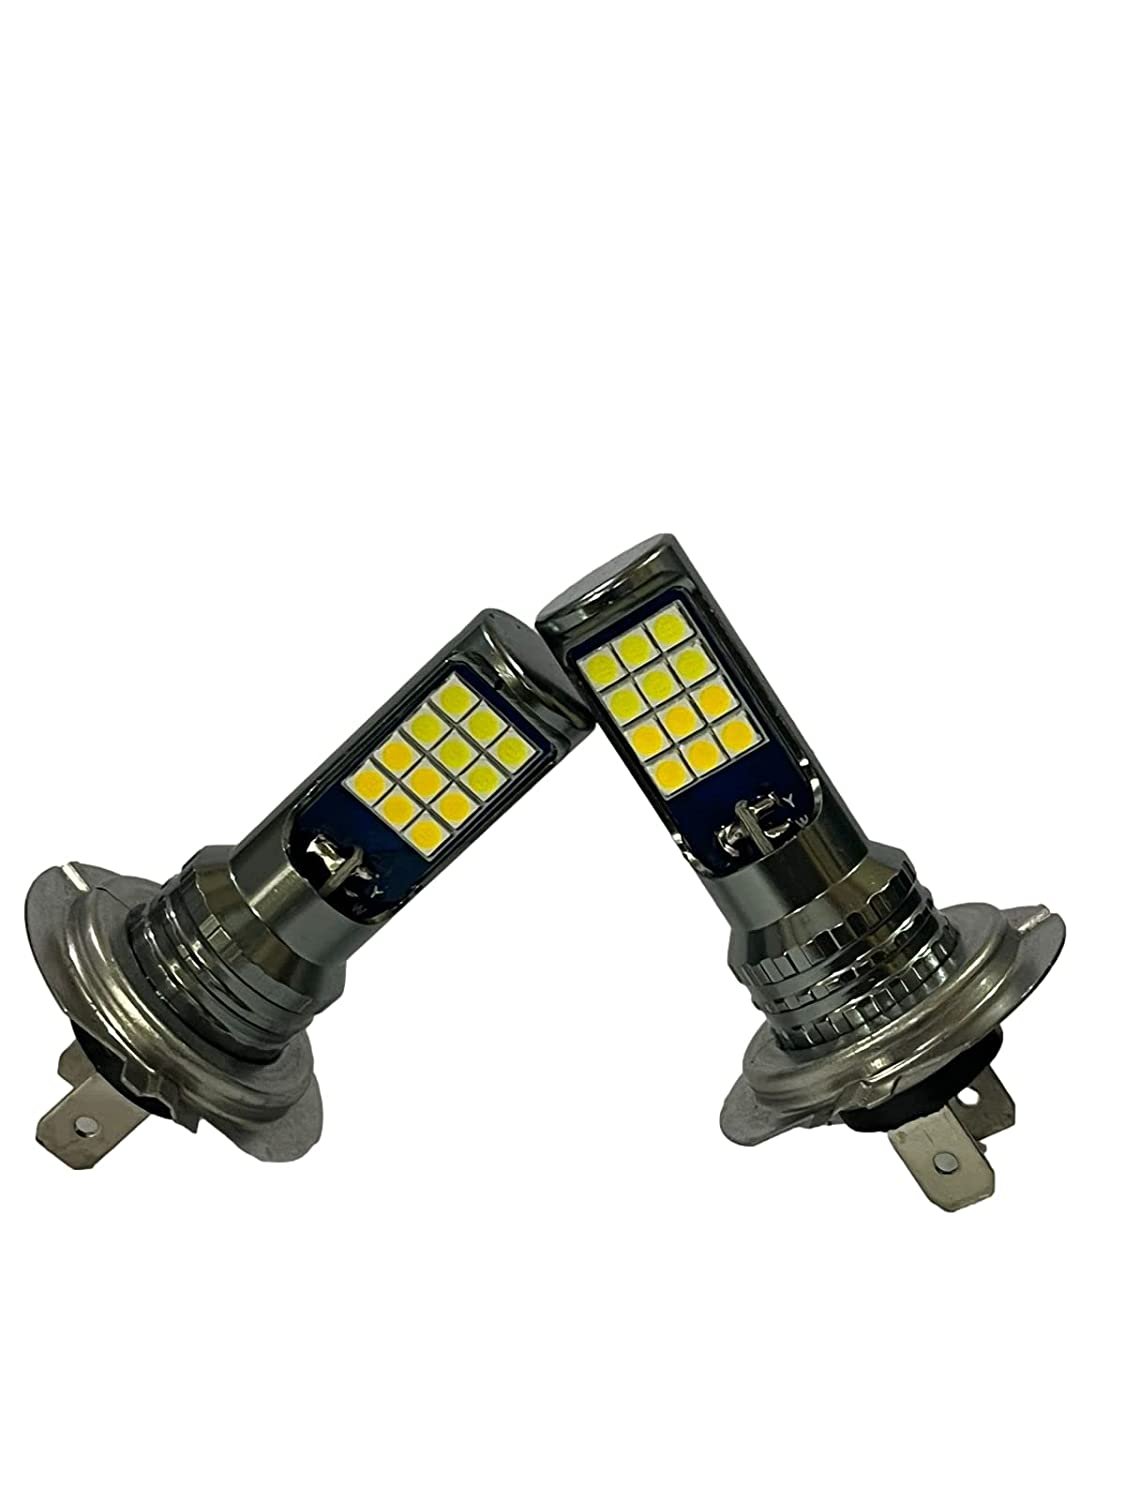 Car Headlight H7 Dual Color Yellow White led Headlights for Car and Bike(2 Pieces) Image 